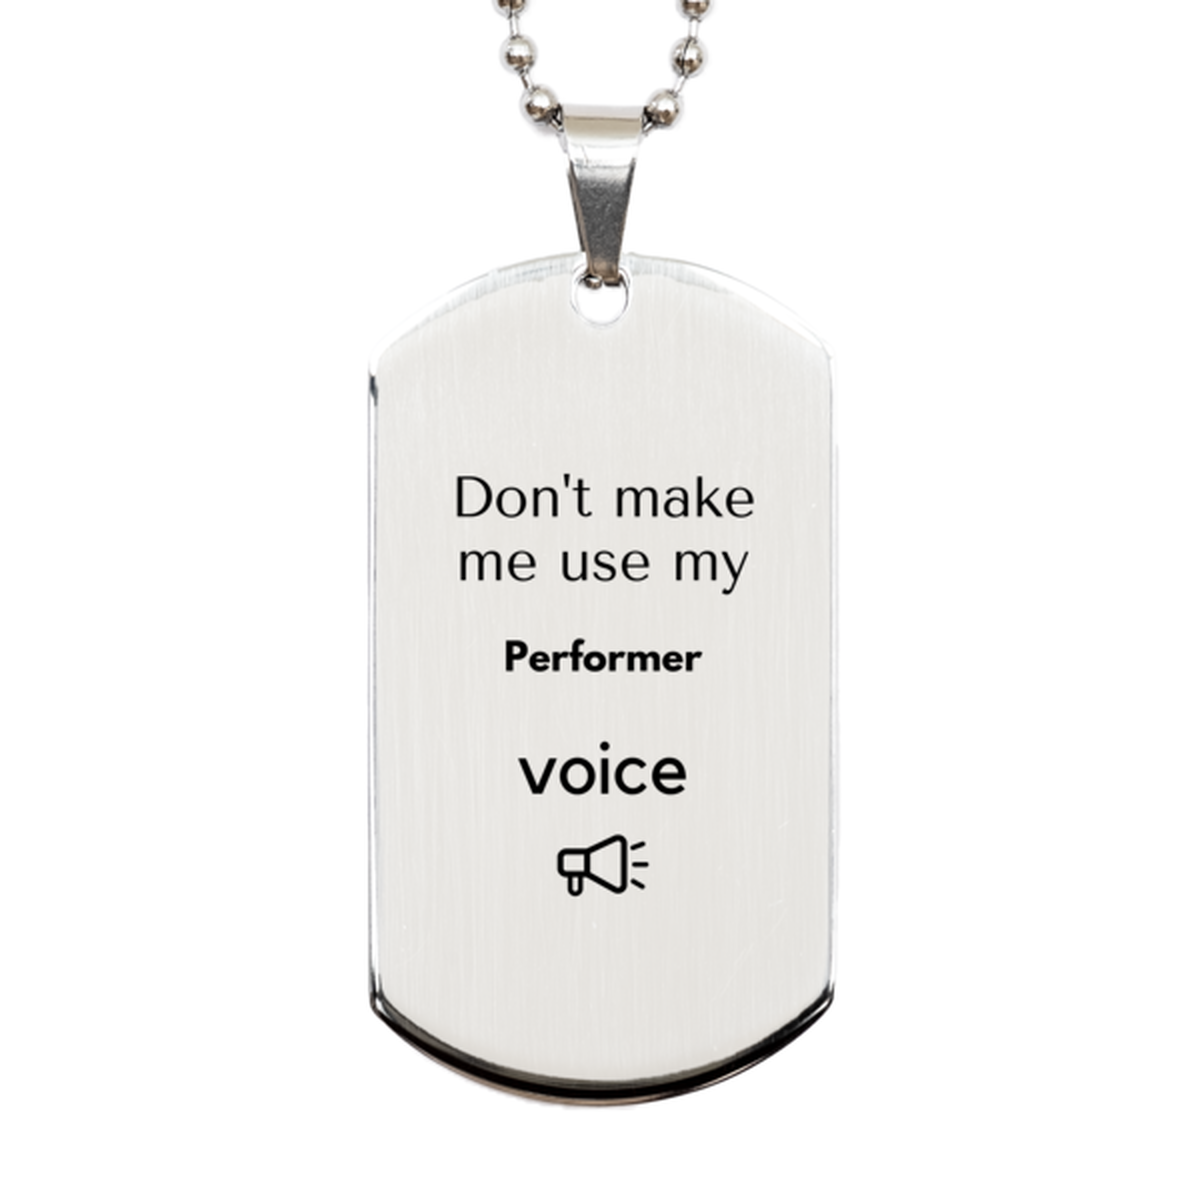 Don't make me use my Performer voice, Sarcasm Performer Gifts, Christmas Performer Silver Dog Tag Birthday Unique Gifts For Performer Coworkers, Men, Women, Colleague, Friends